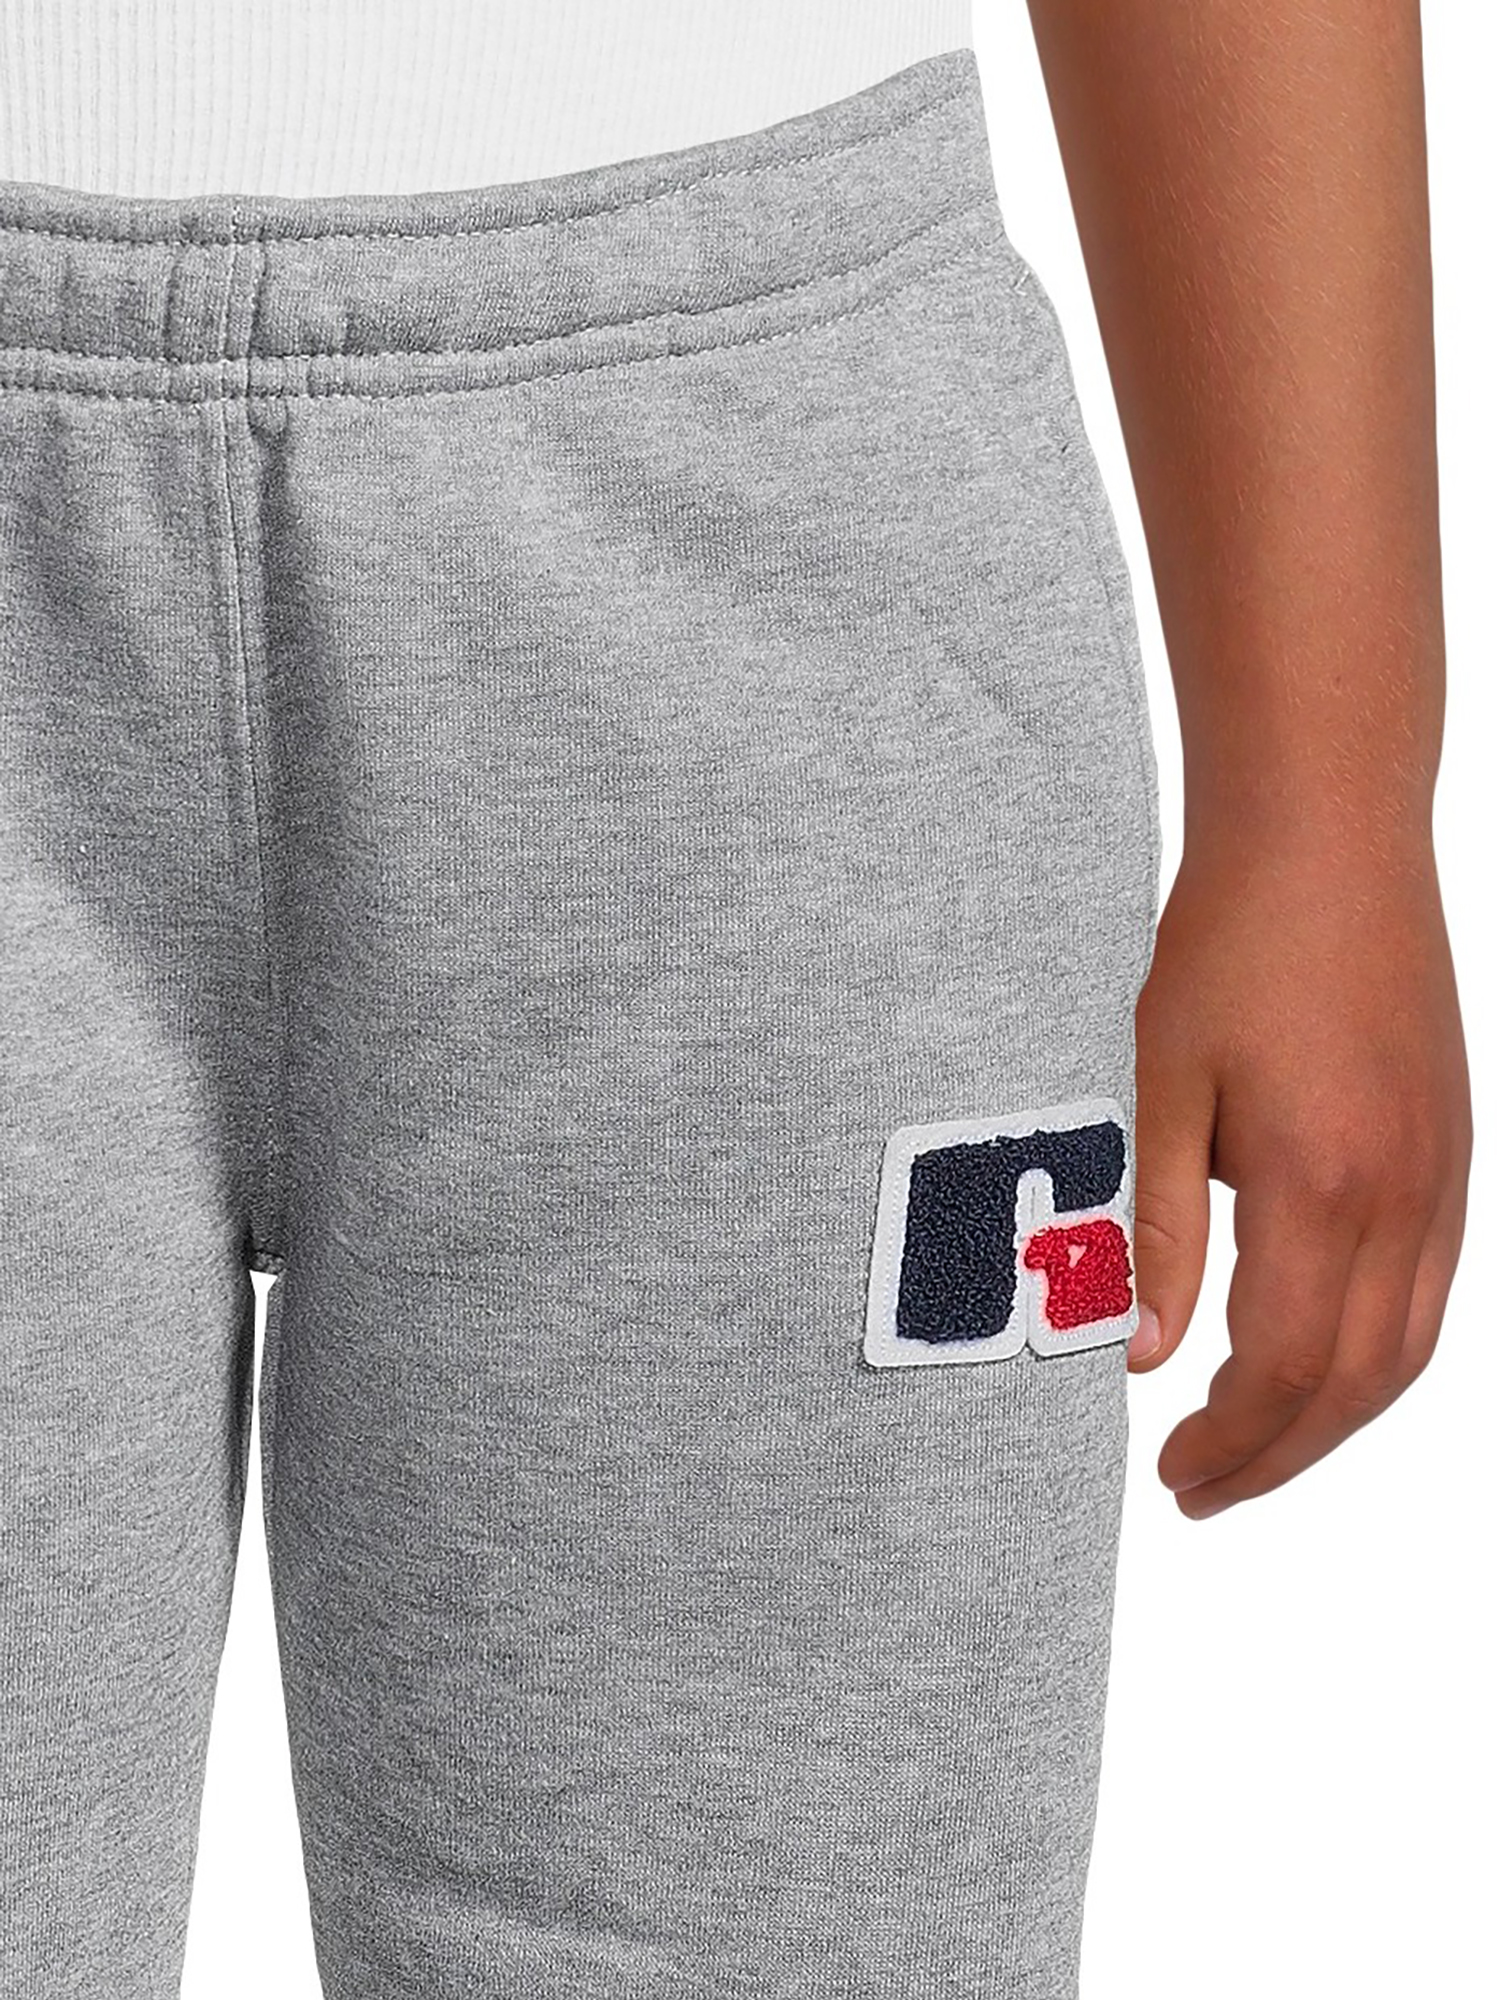 Russell Athletic Boys Chenille Jogger Pants, Sizes 4-16 - image 4 of 5